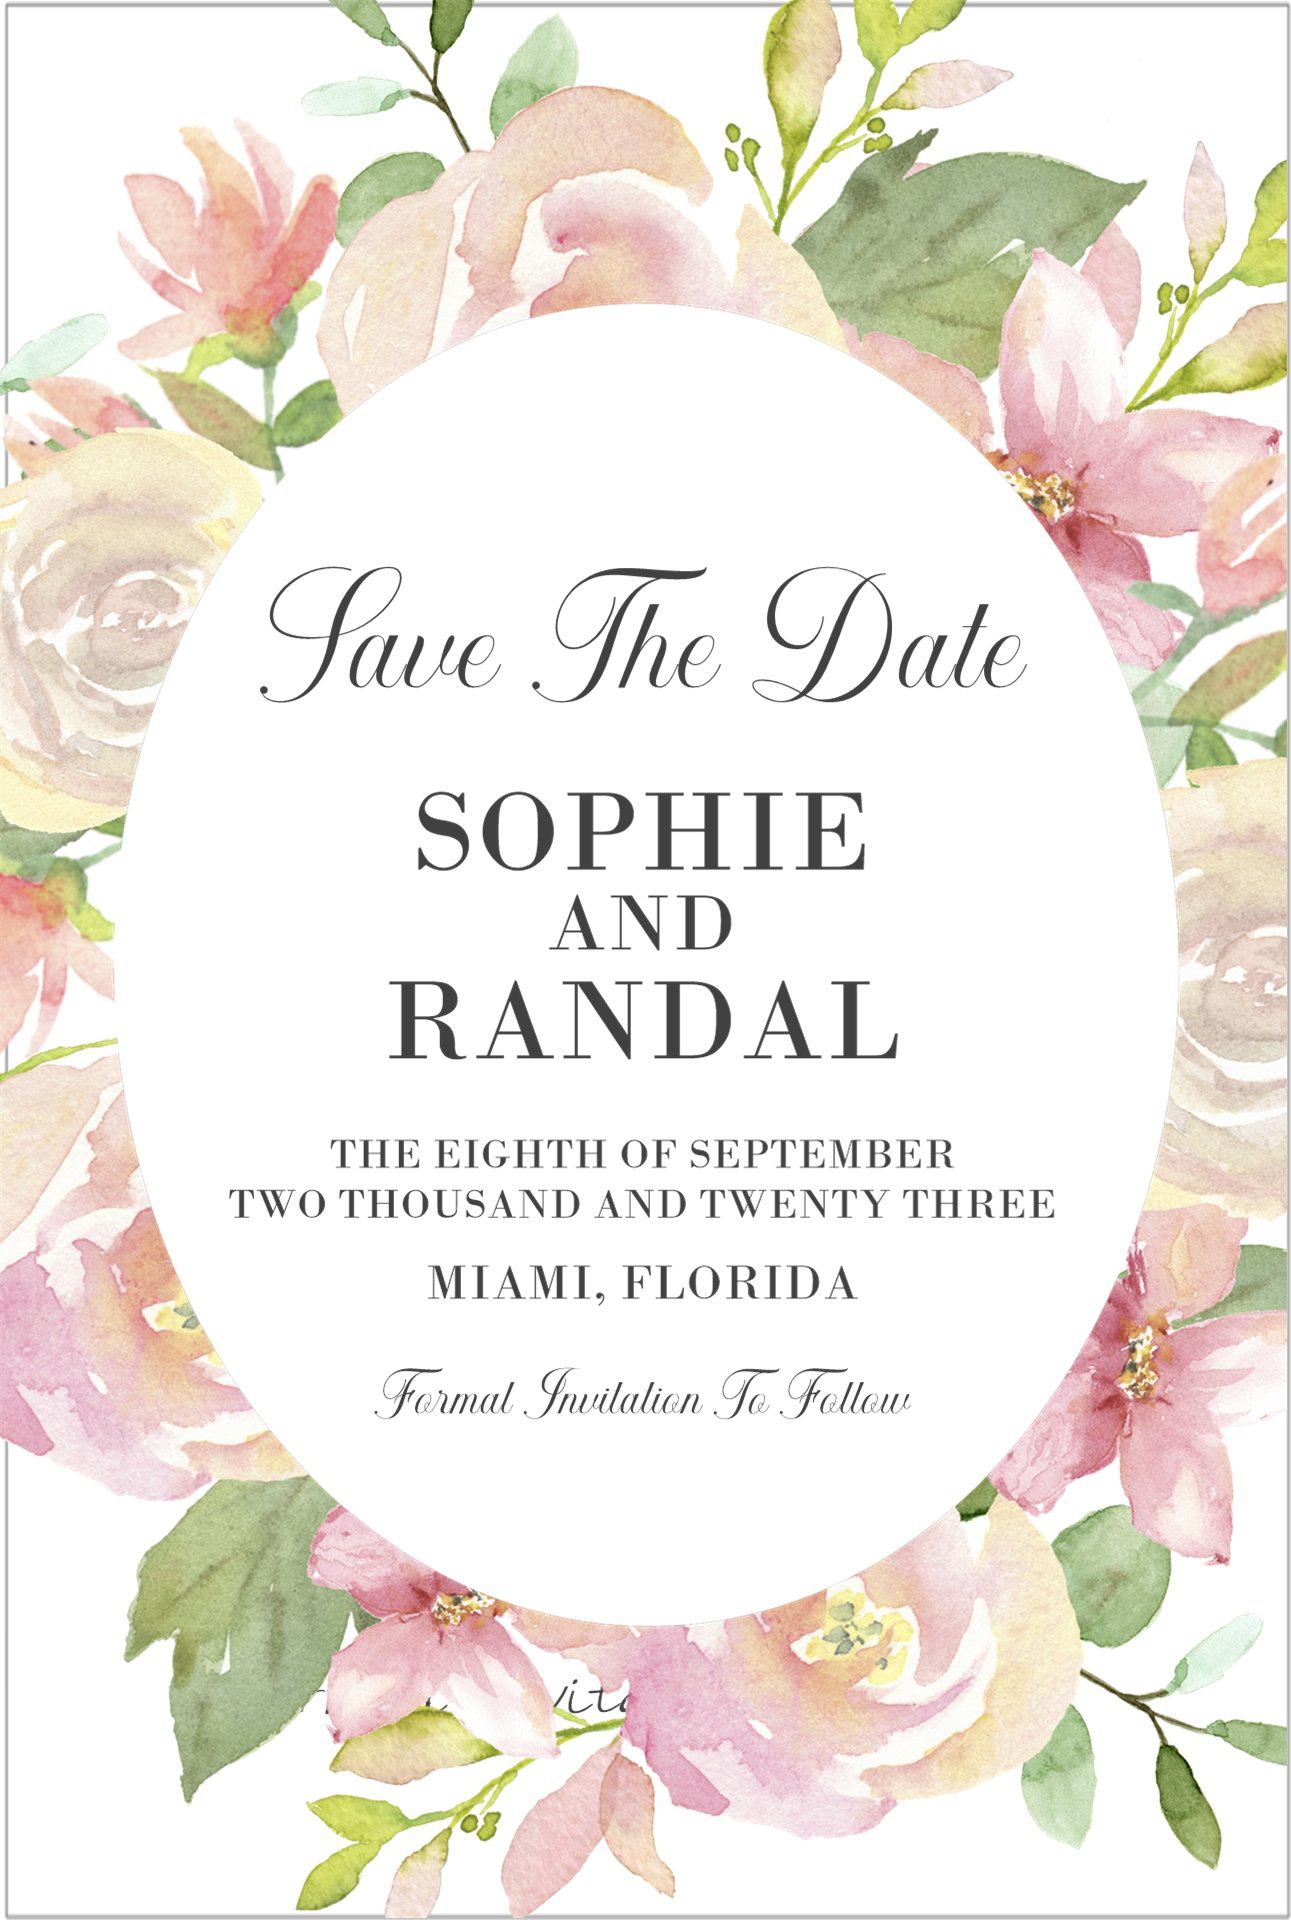 Pink Floral Wedding Save The Date Cards